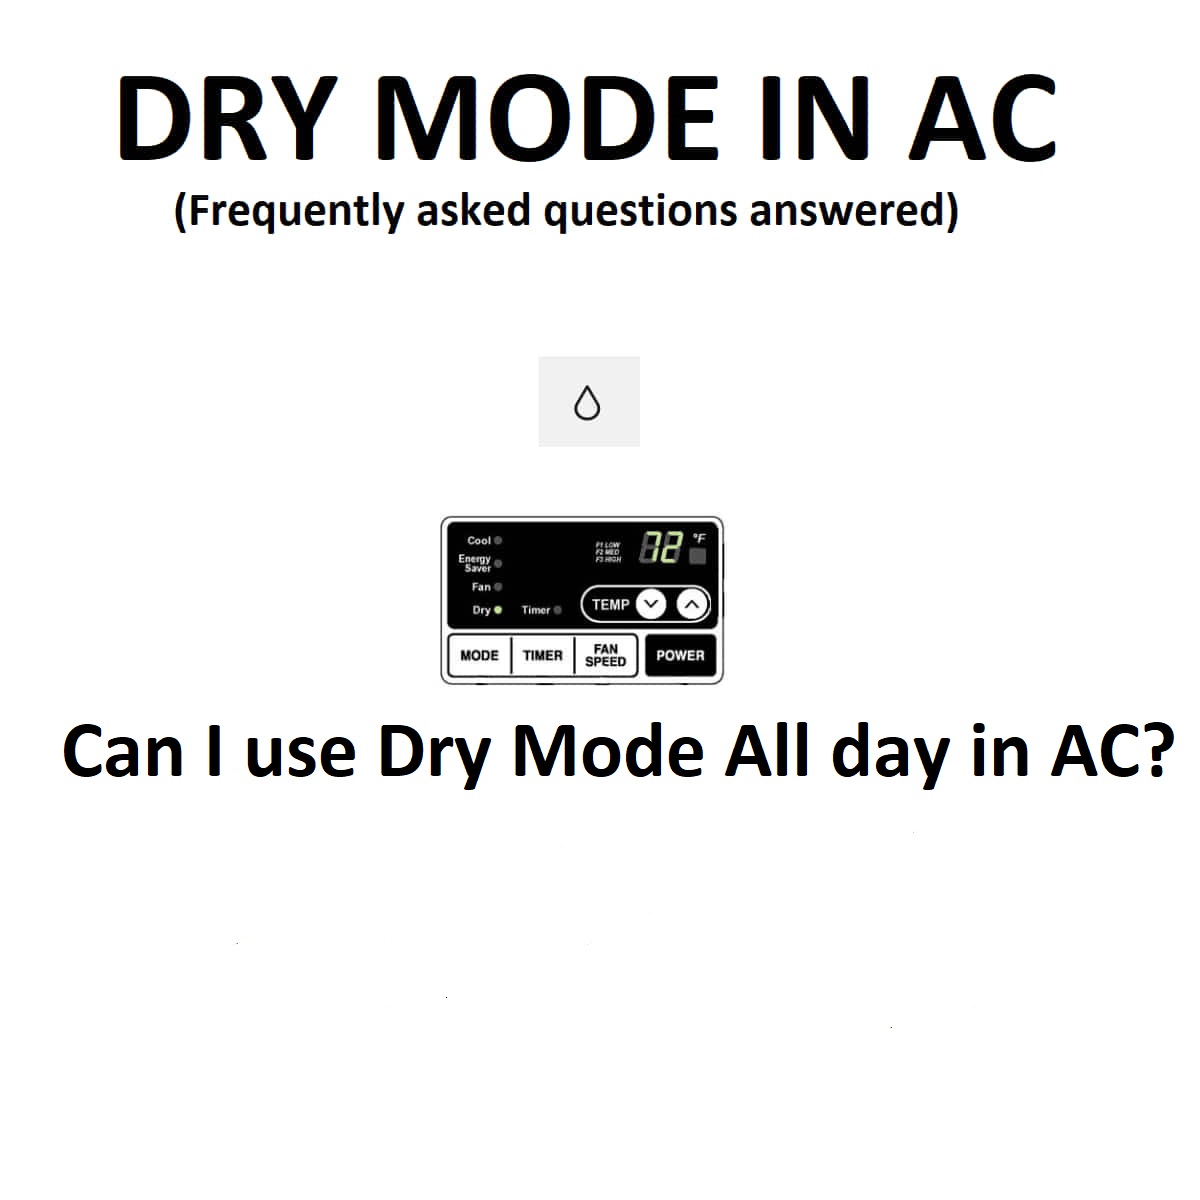 Can I use dry mode all day